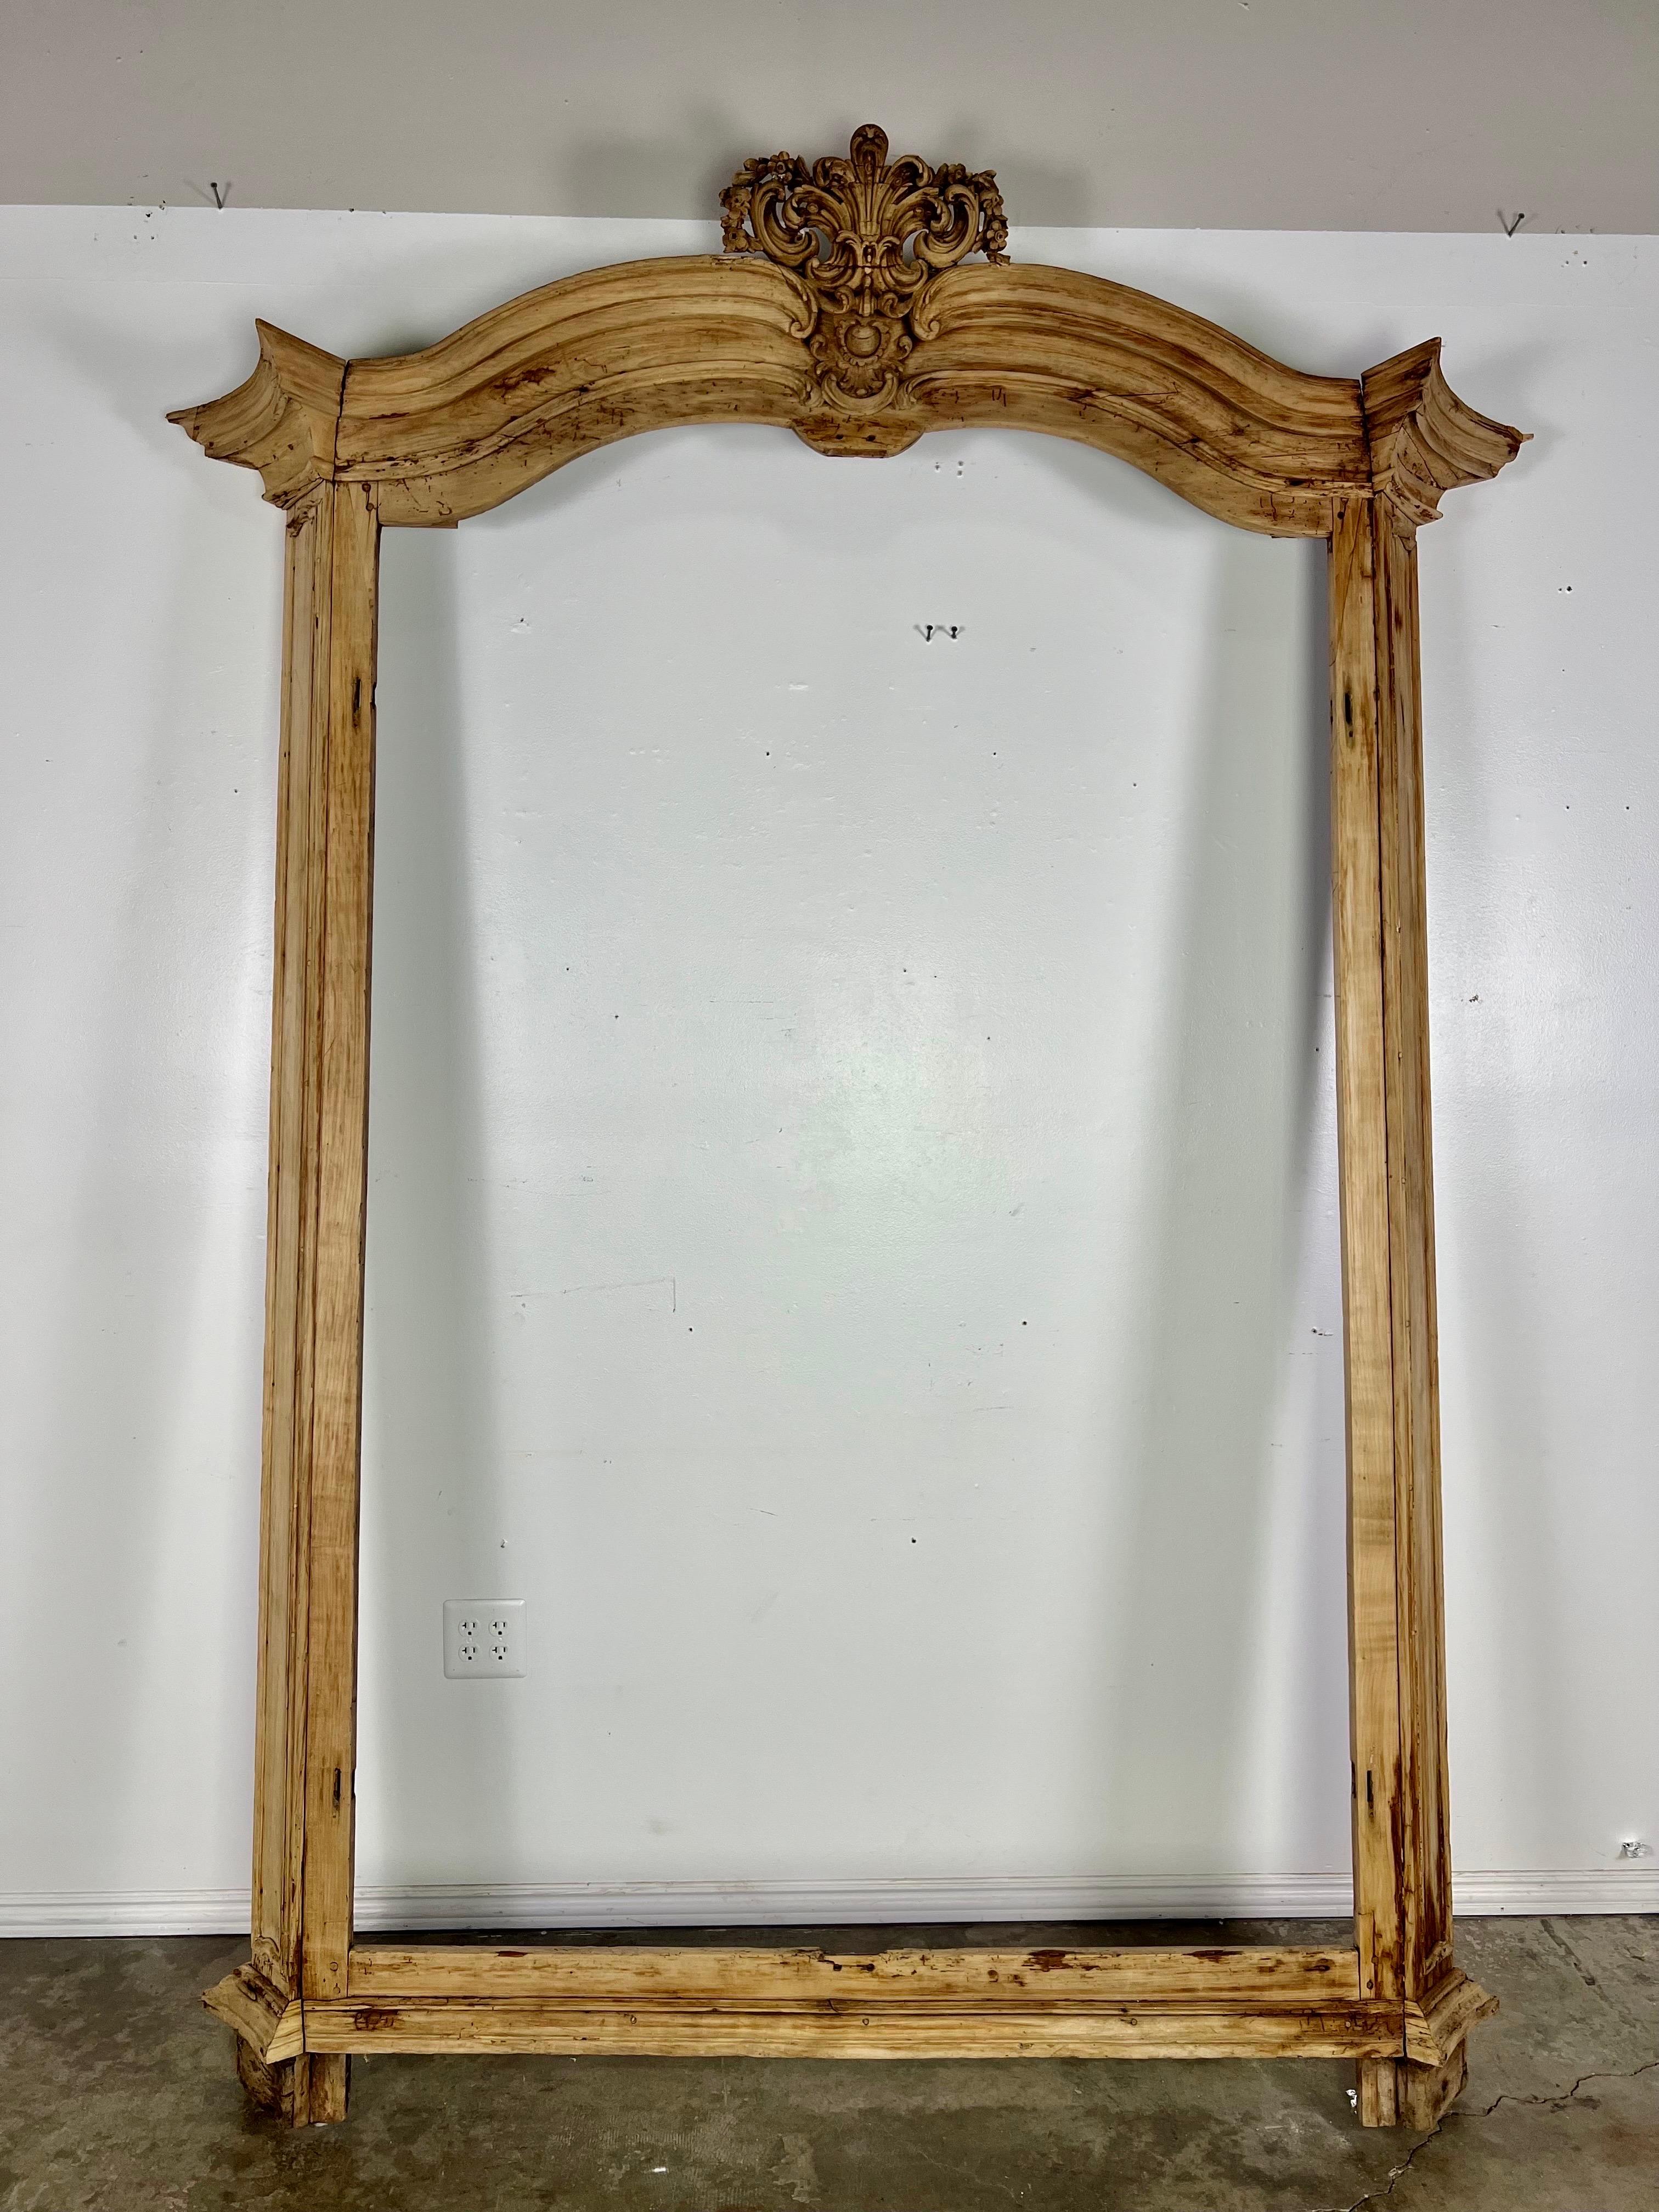 Early 19th century French provincial door surround.  It would also make an incredible mirror.  The top carving is a Fleur de lys surrounded by acanthus leaves, scrolls and flowers.  There is also a bottom cartouche surrounded by acanthus leaves.  